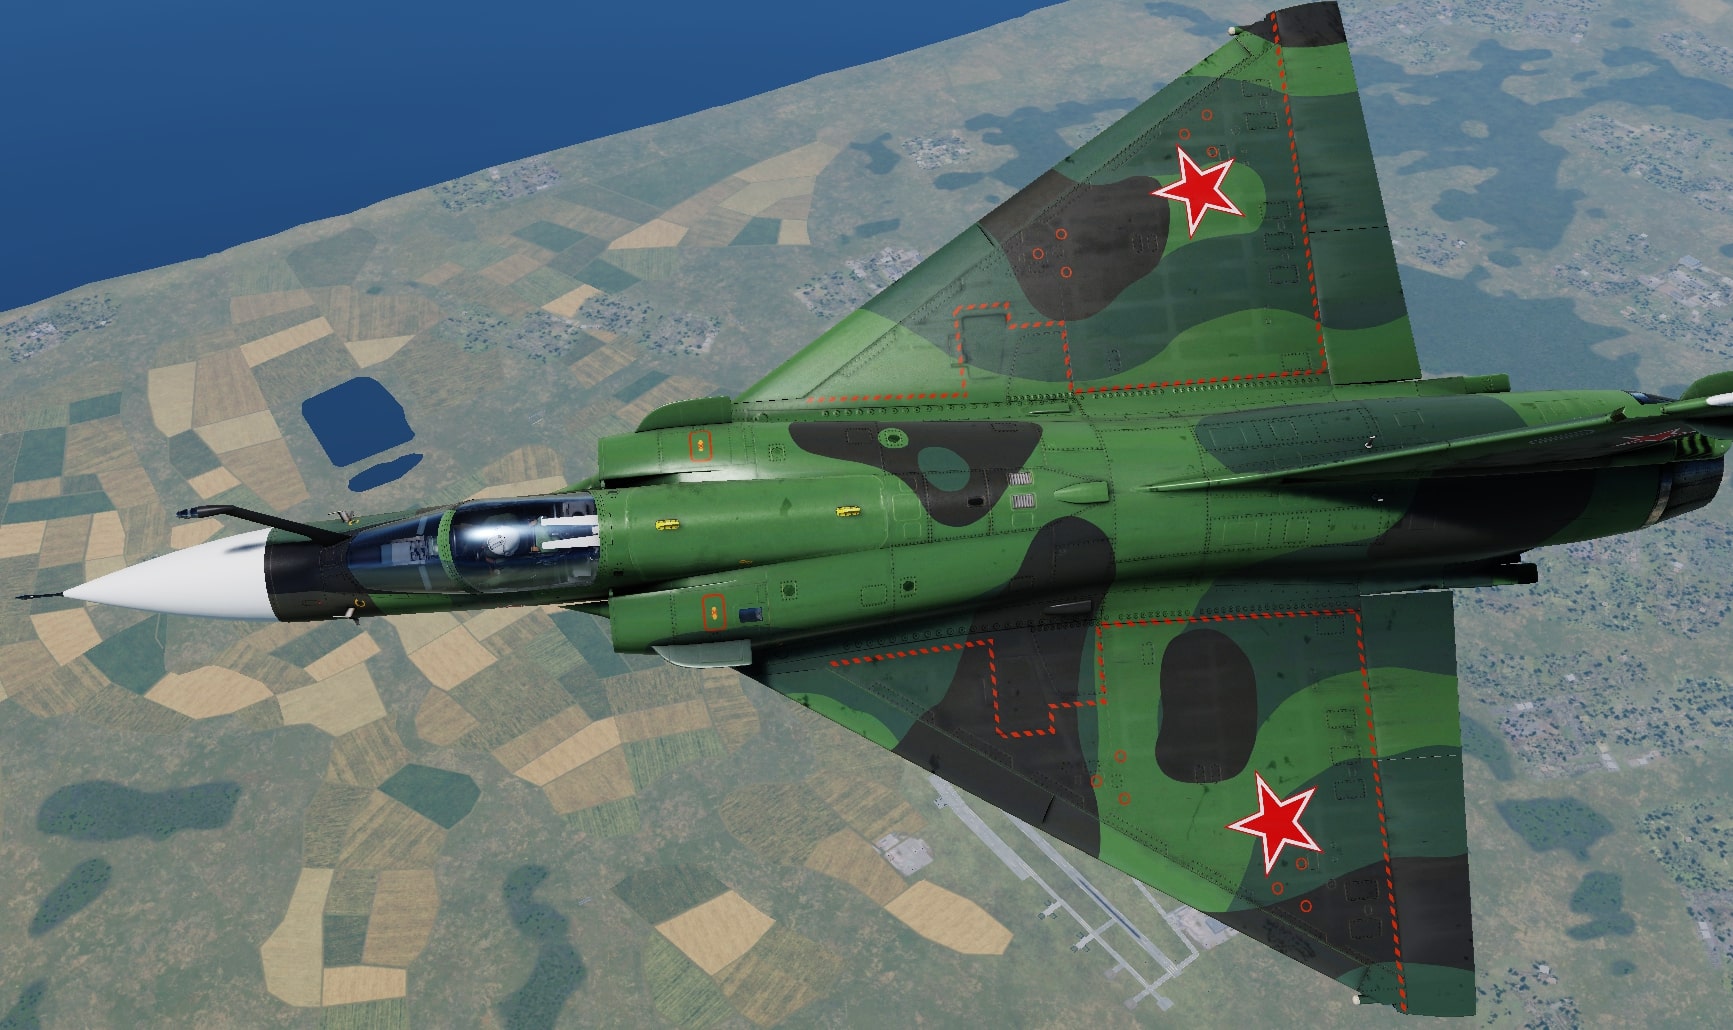 Mirage 2000C Redfor Livery (Soviet or Polish; Fictional)